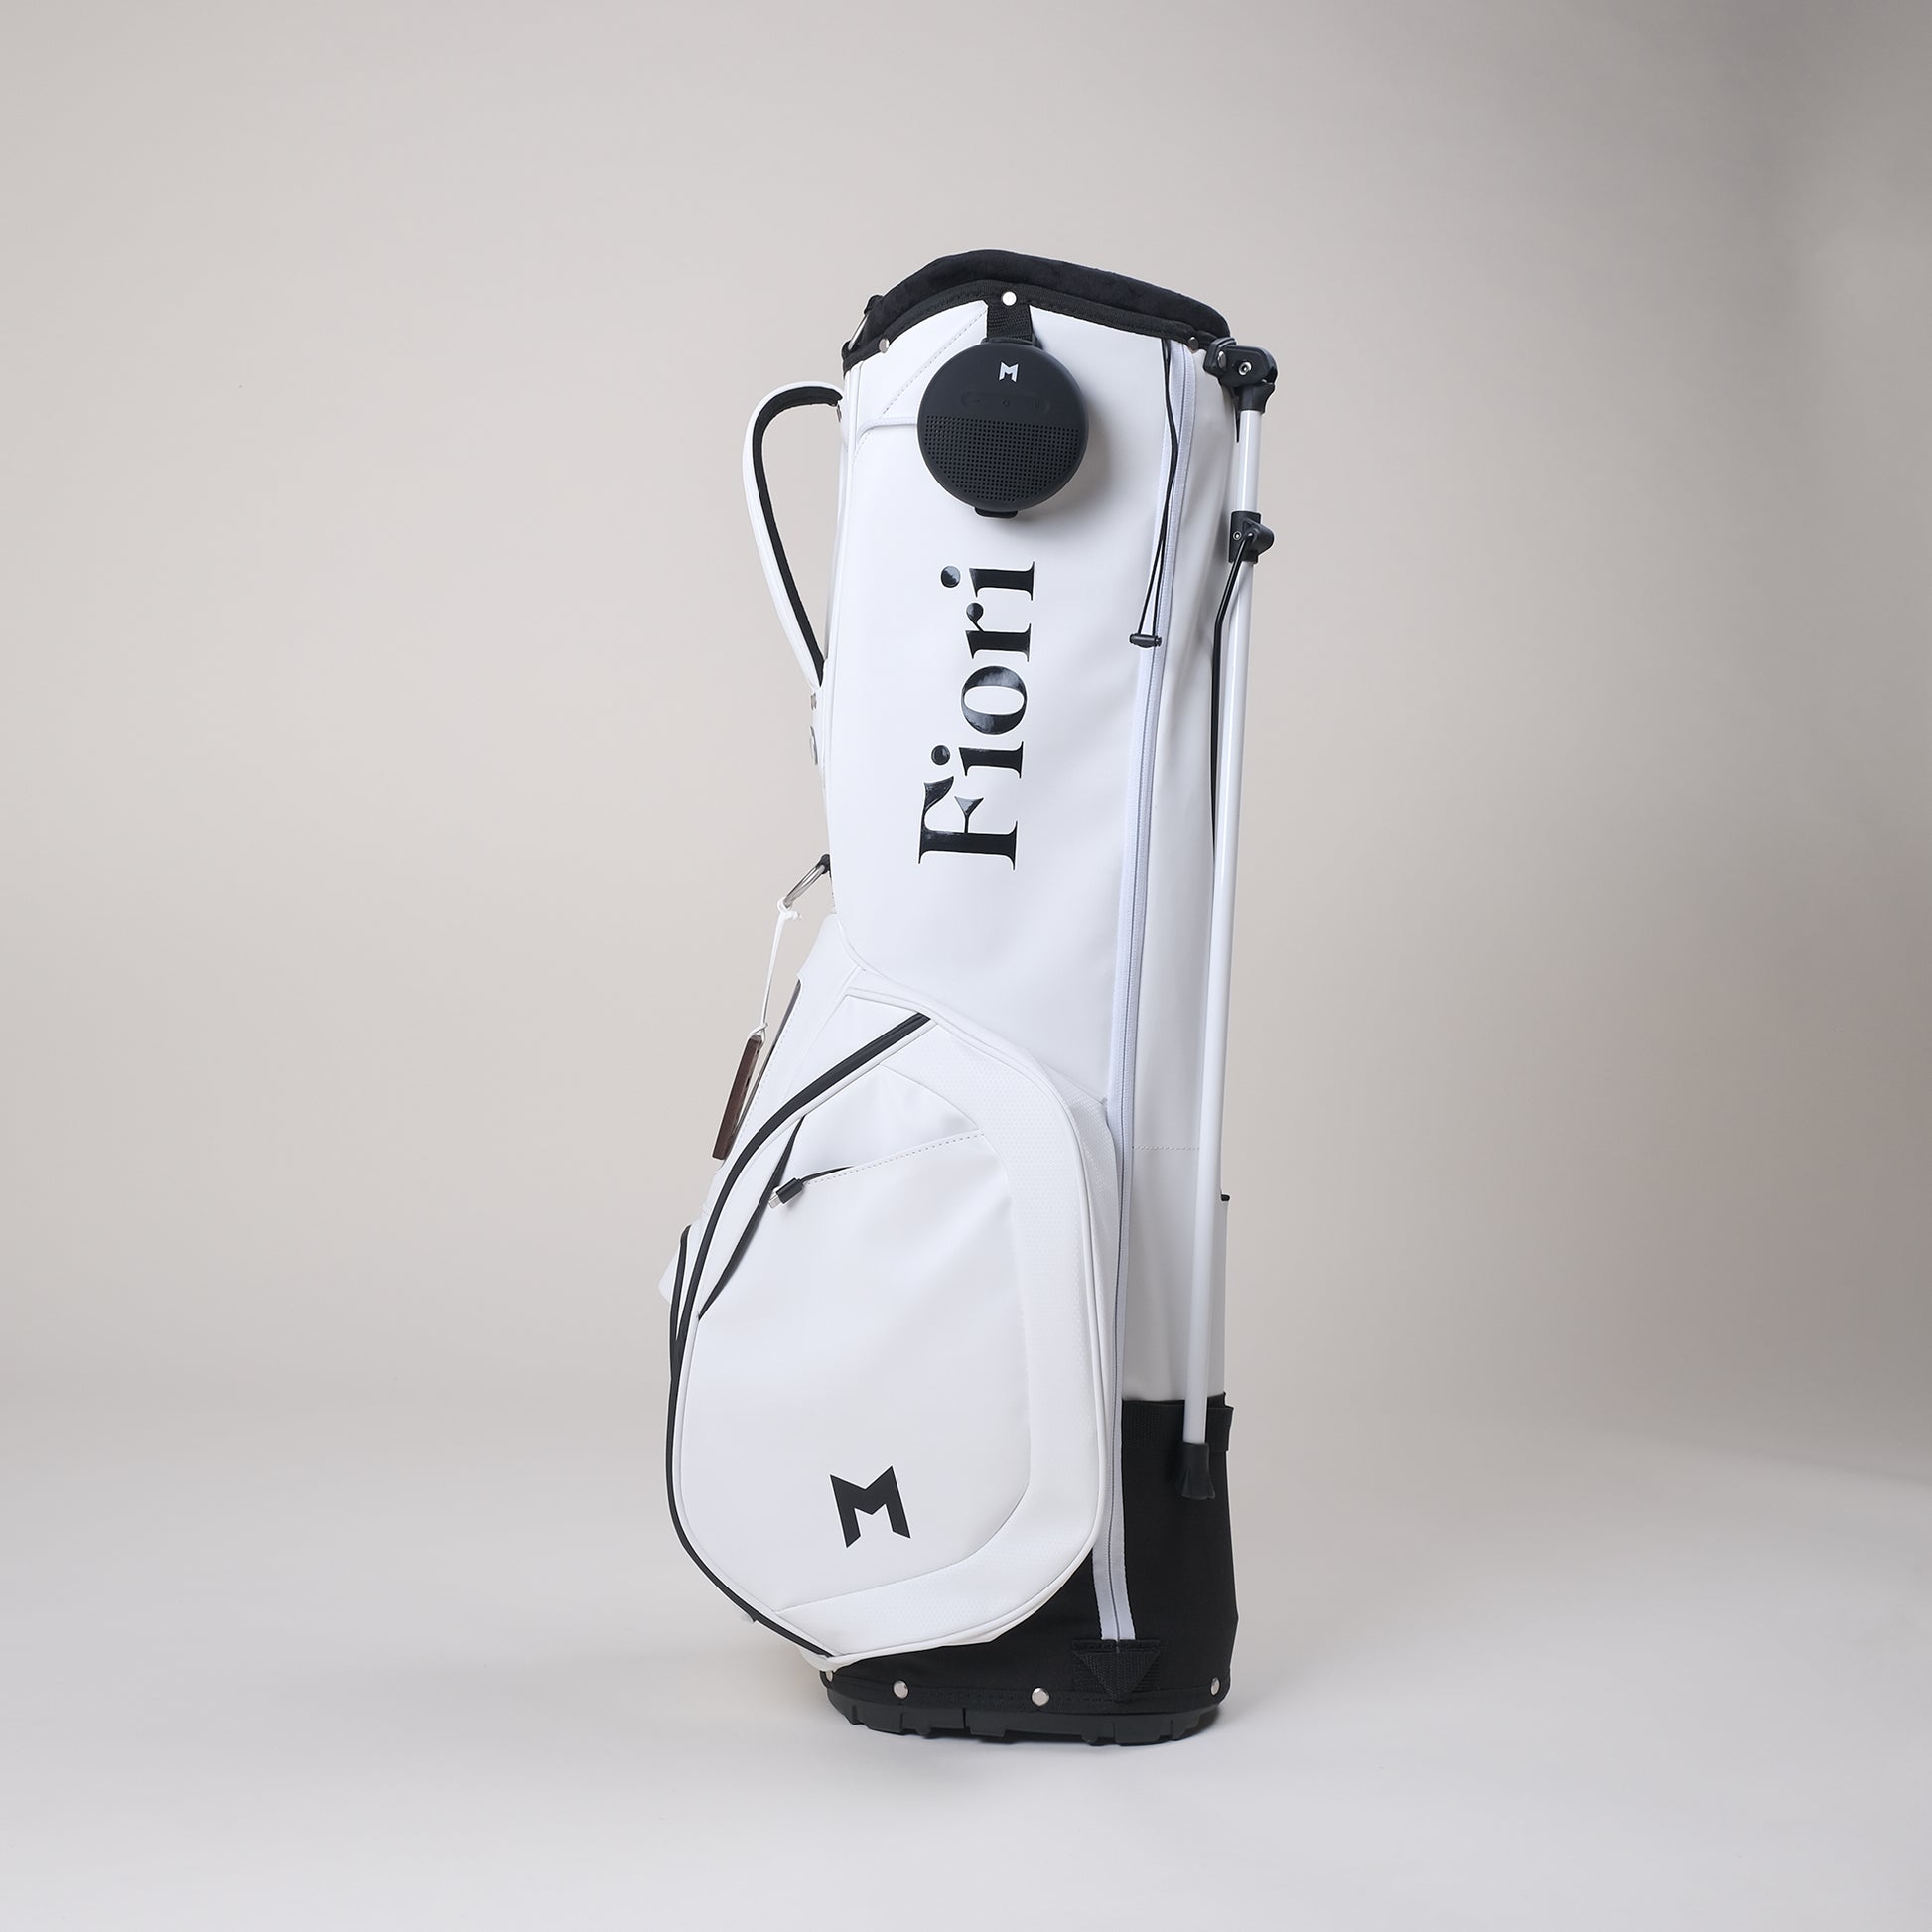 The MNML GOLF and Fiori Golf collaboration features a white MV2 golf bag with a contrasting black Fiori Golf logo. 